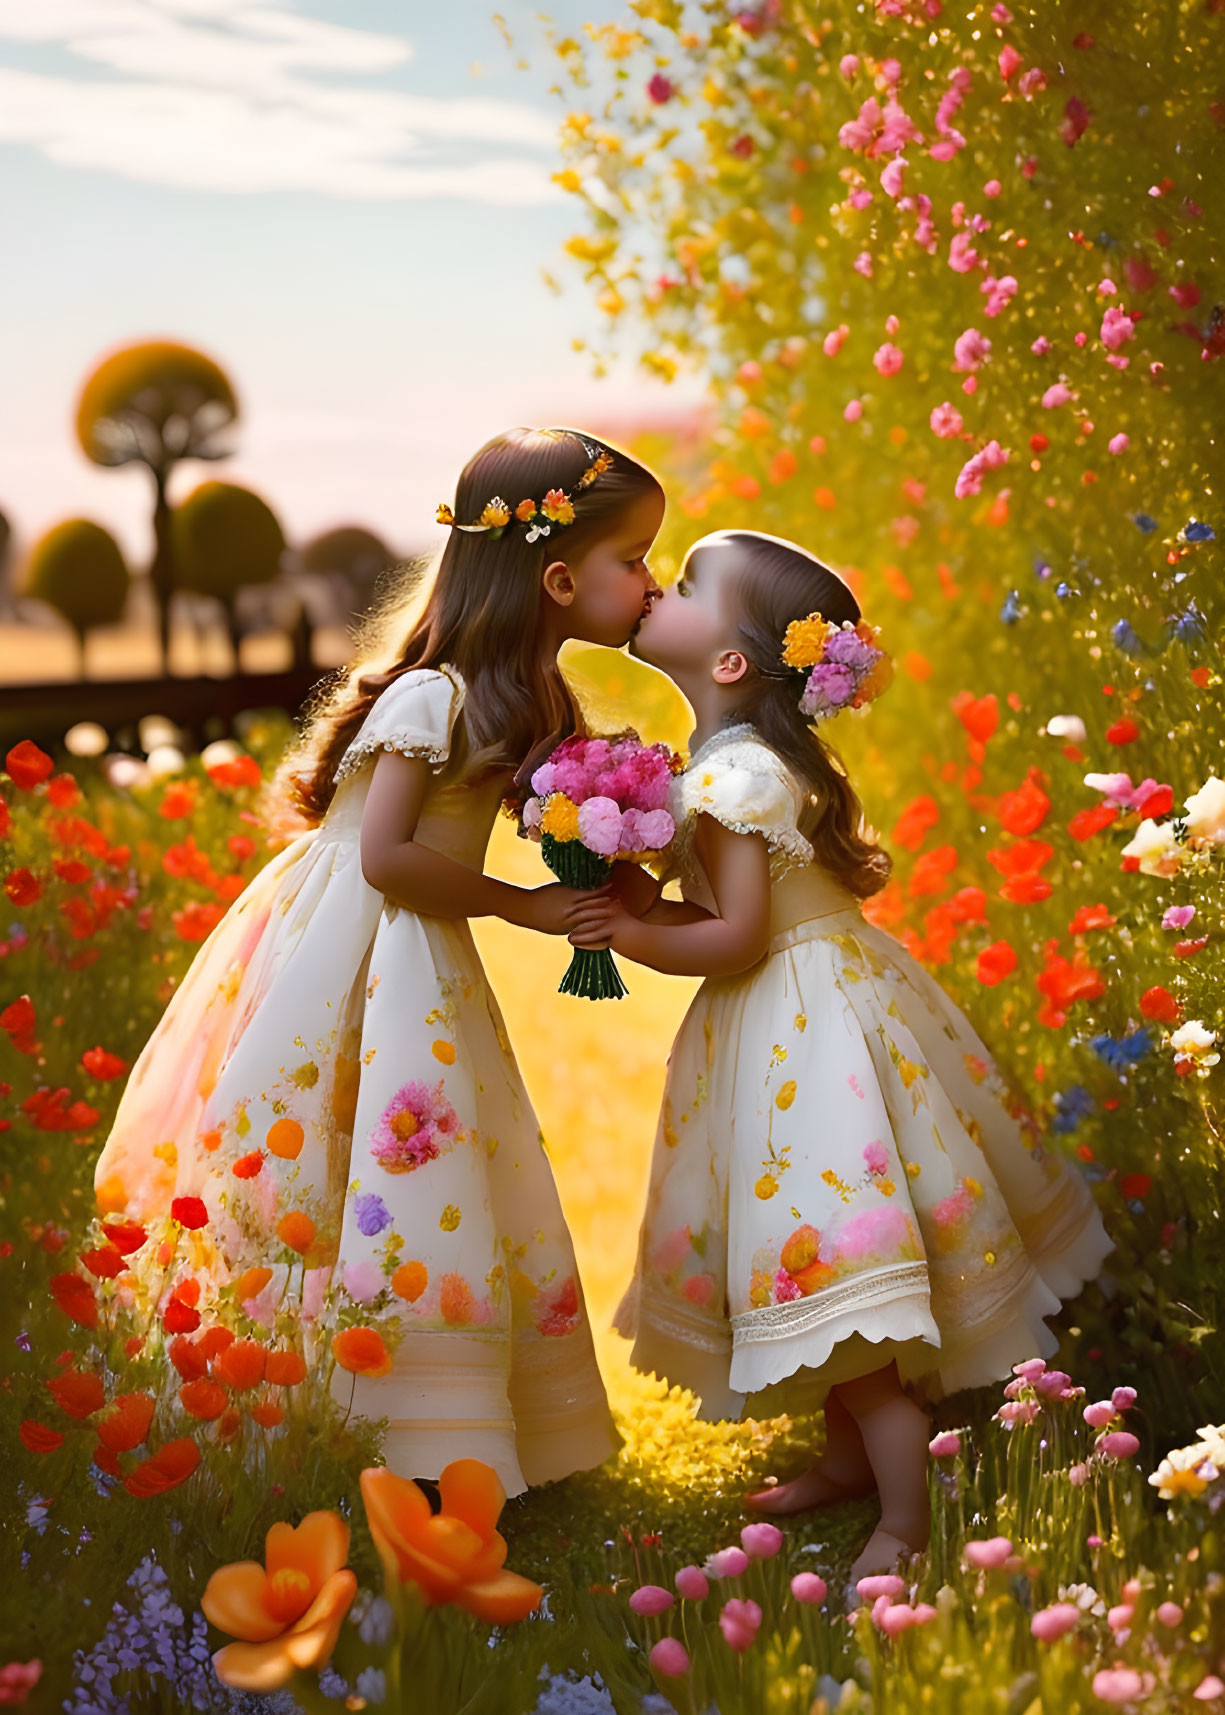 Two young girls in floral dresses kissing in vibrant flower field